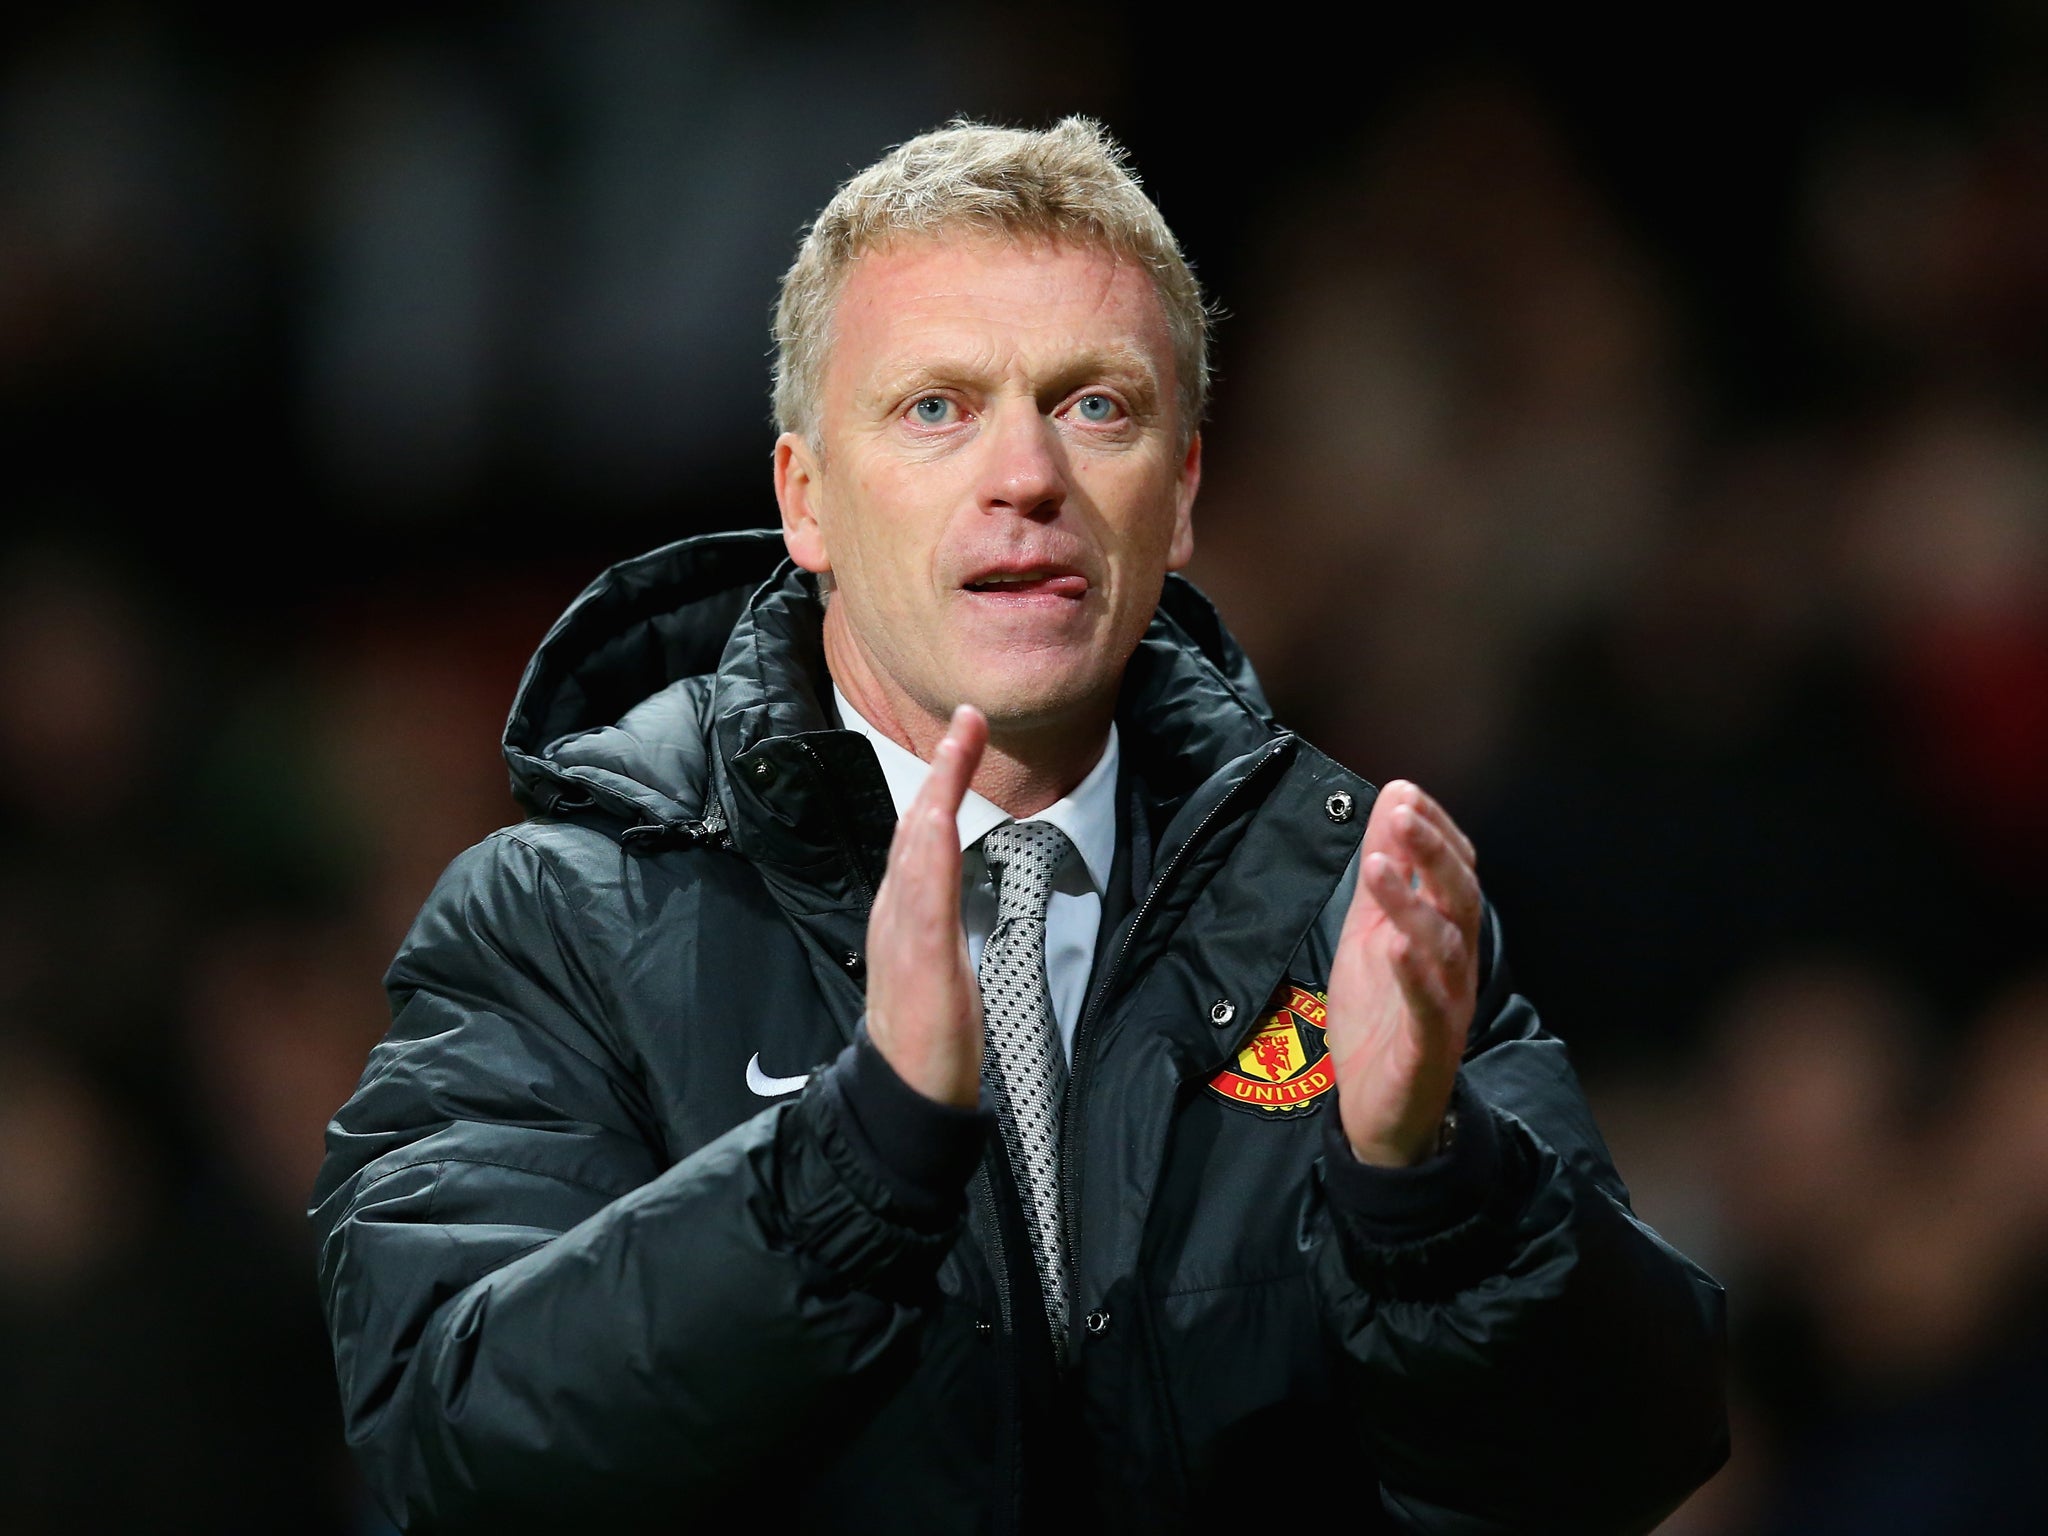 David Moyes applauds the Manchester United fans after their 1-0 win over Real Sociedad